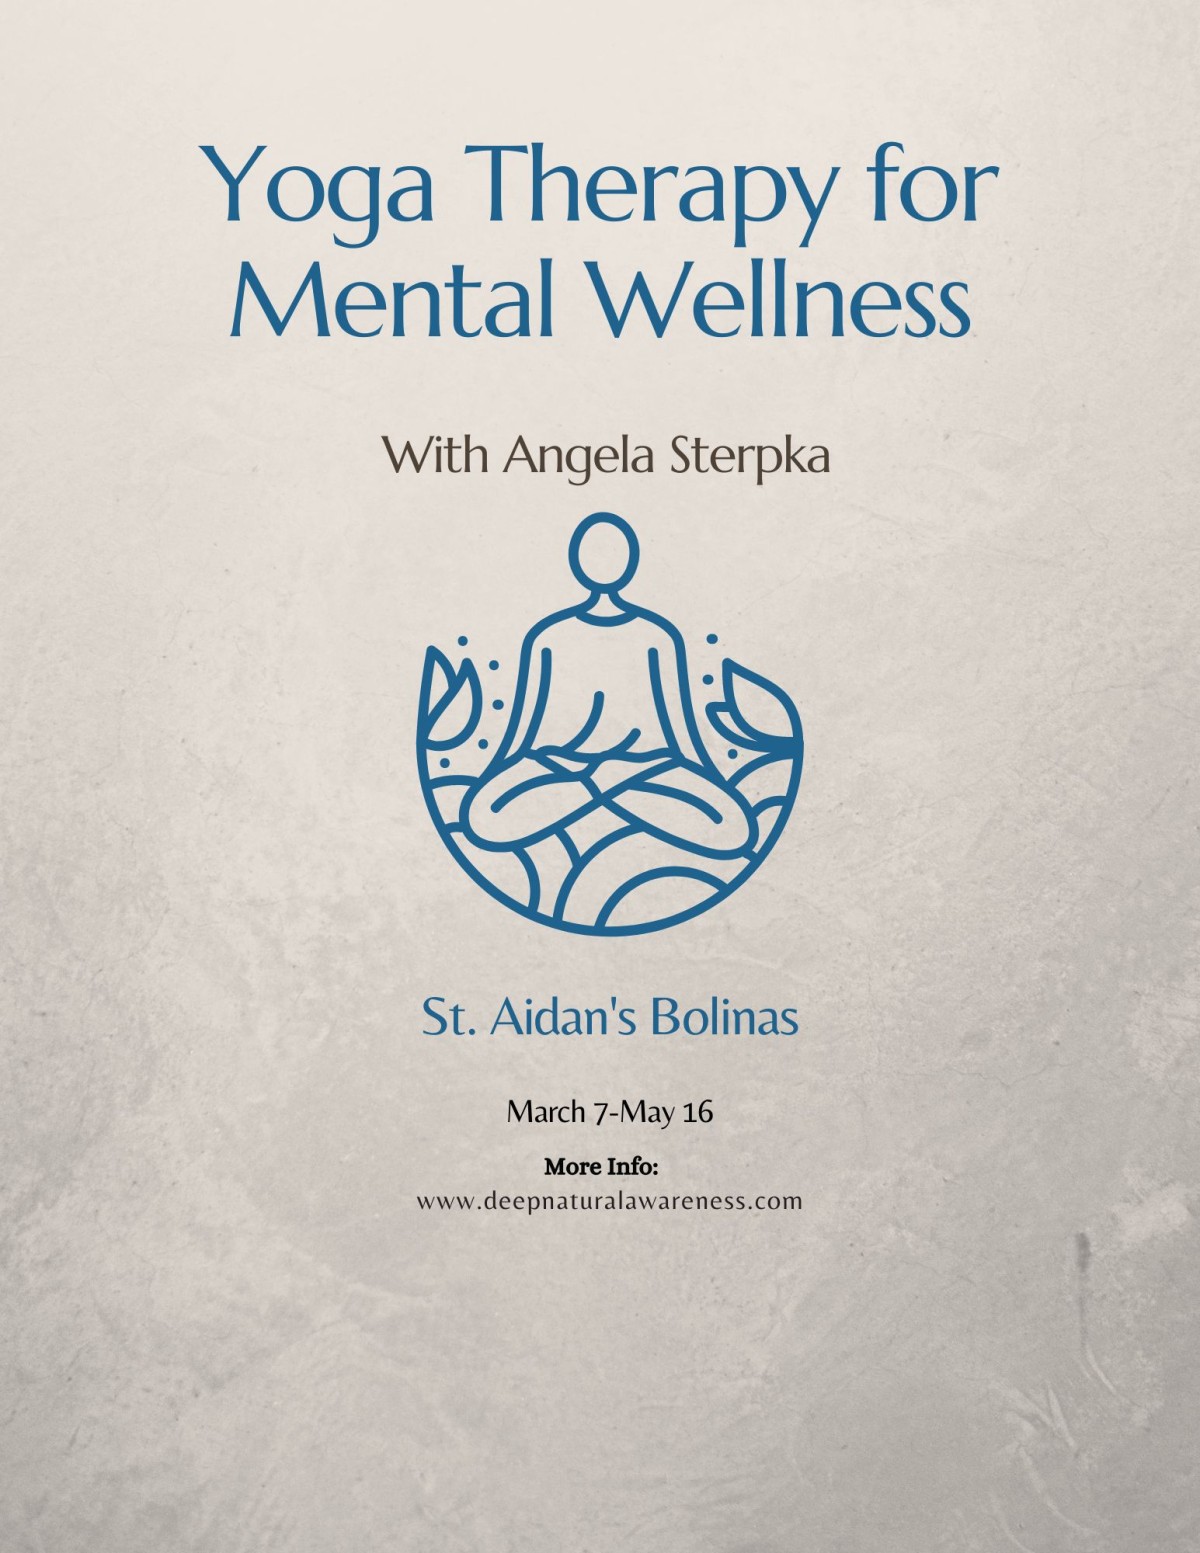 Yoga Therapy for Mental Wellness